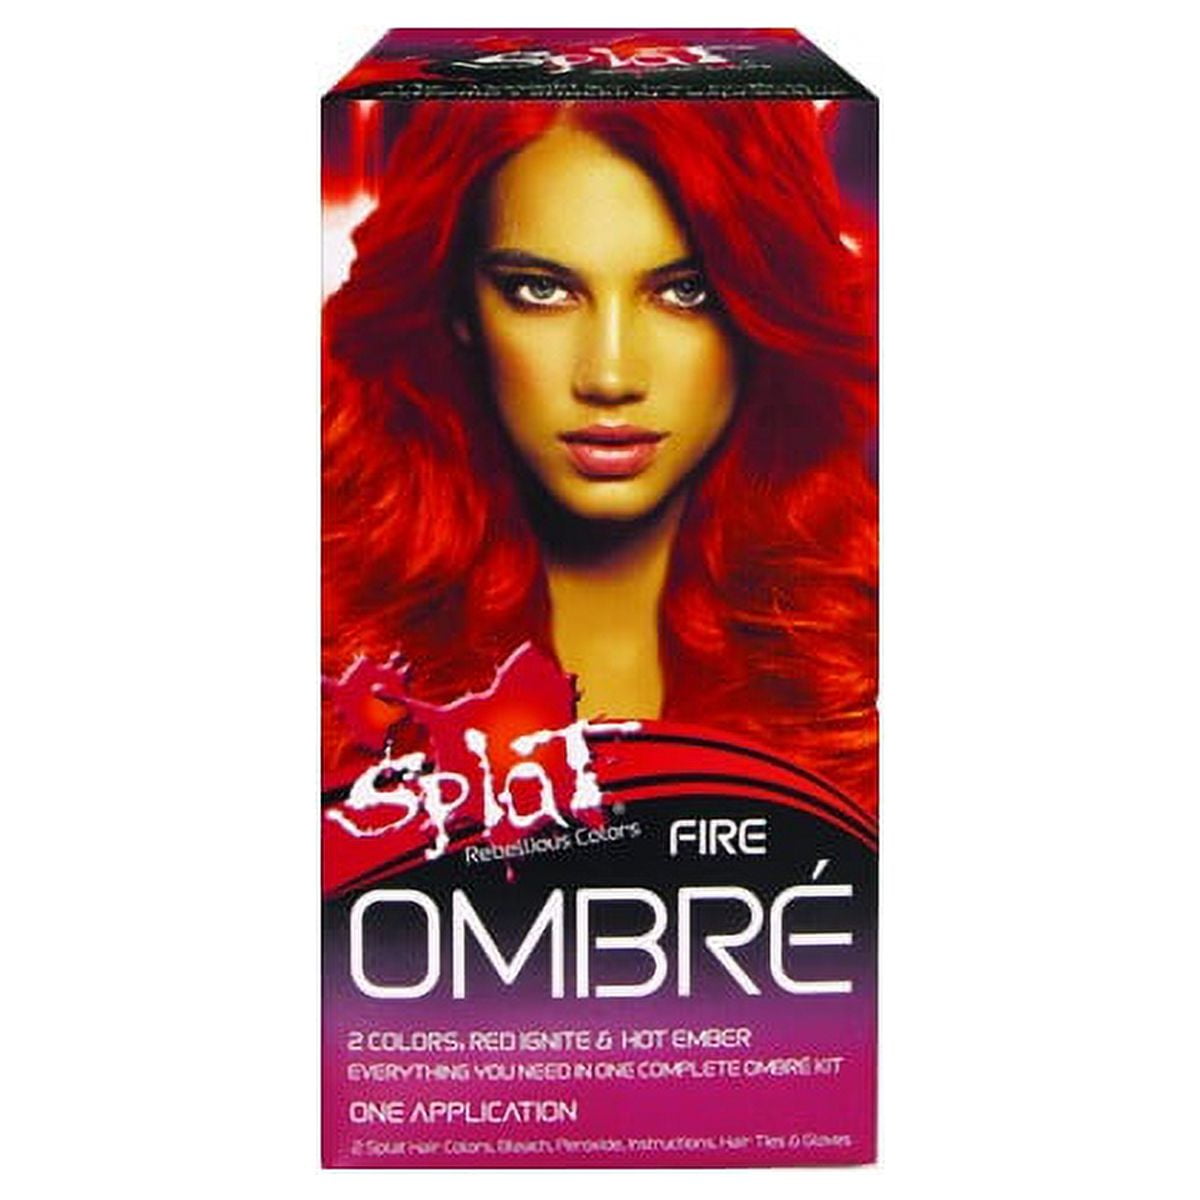 Splat Hair Color Ombre Fire Fire Red Hot Ember